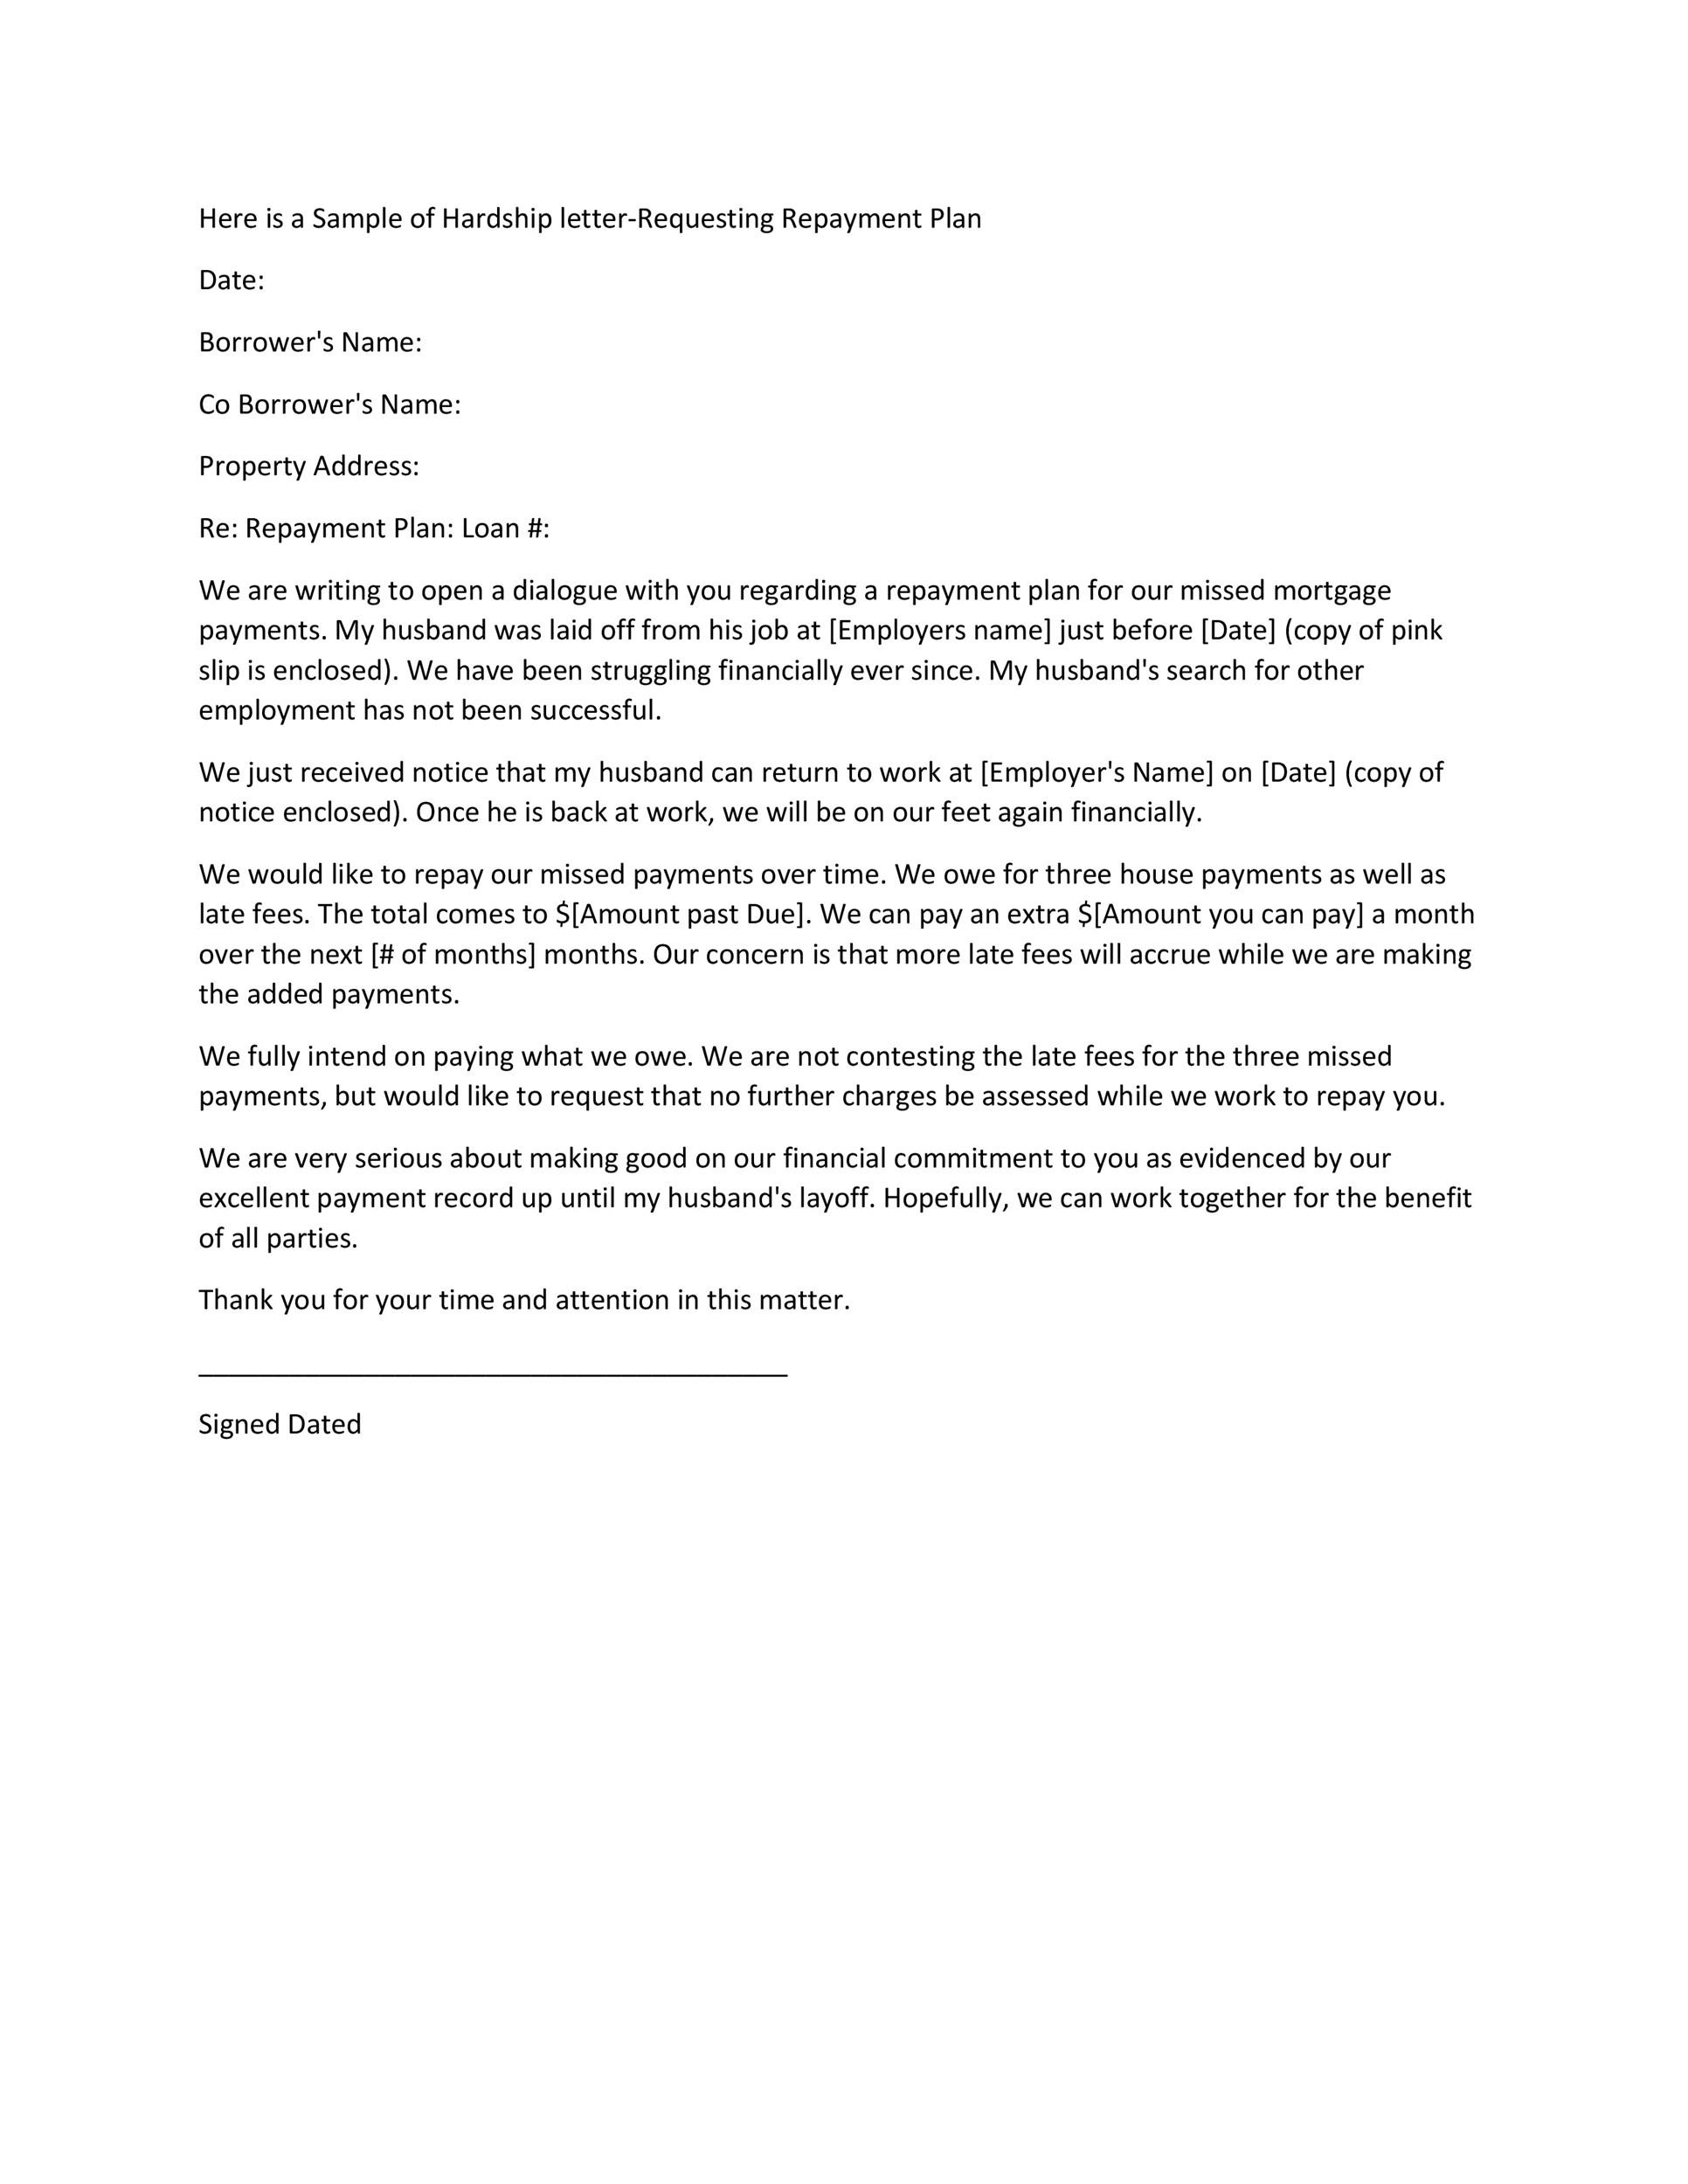 Sample Letter To Employee To Work Overtime from templatelab.com